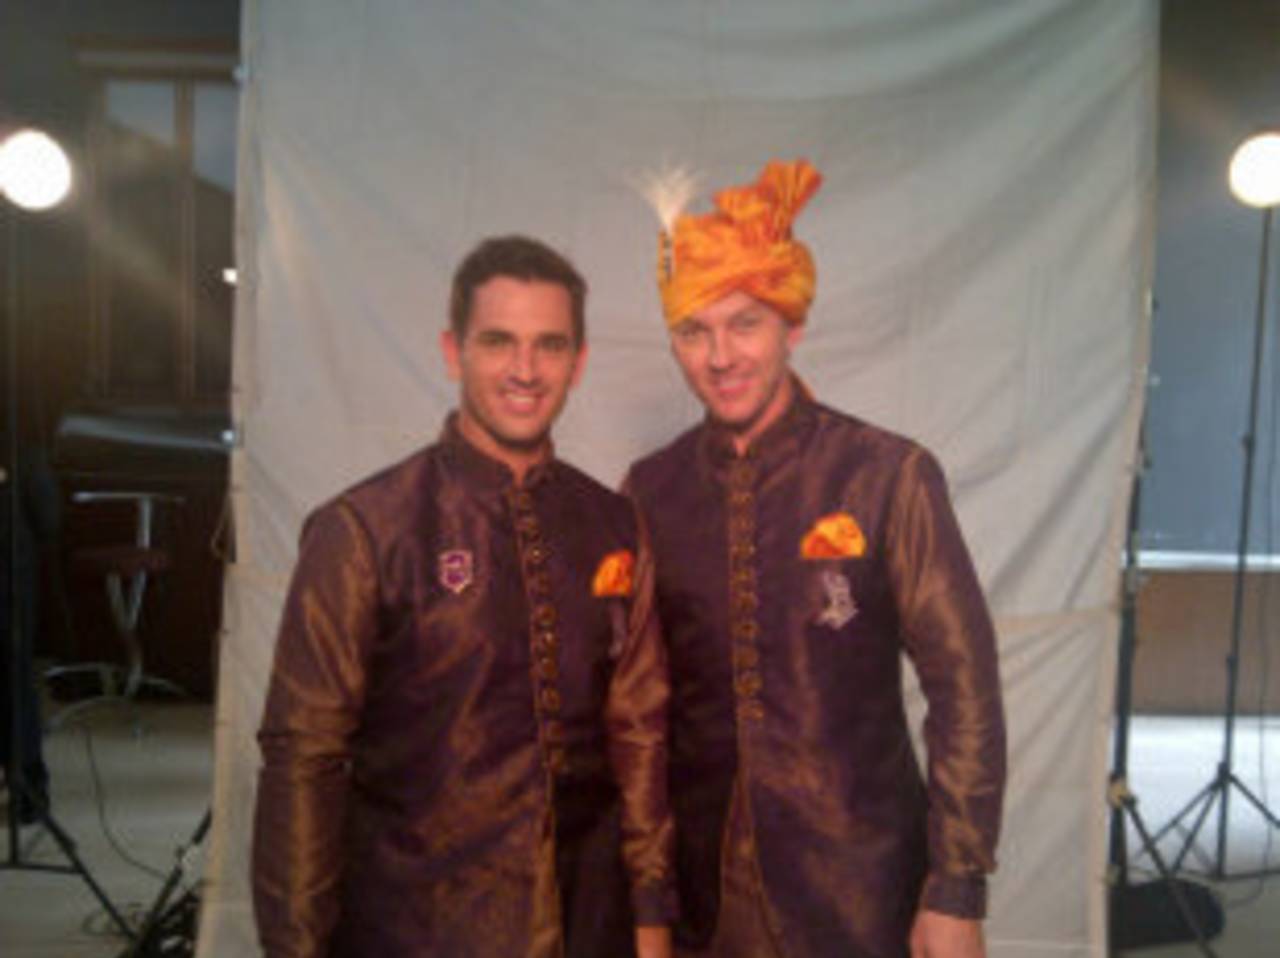 Going native: the author and Brett Lee get togged out in sherwanis for a promotional film&nbsp;&nbsp;&bull;&nbsp;&nbsp;Ryan ten Doeschate